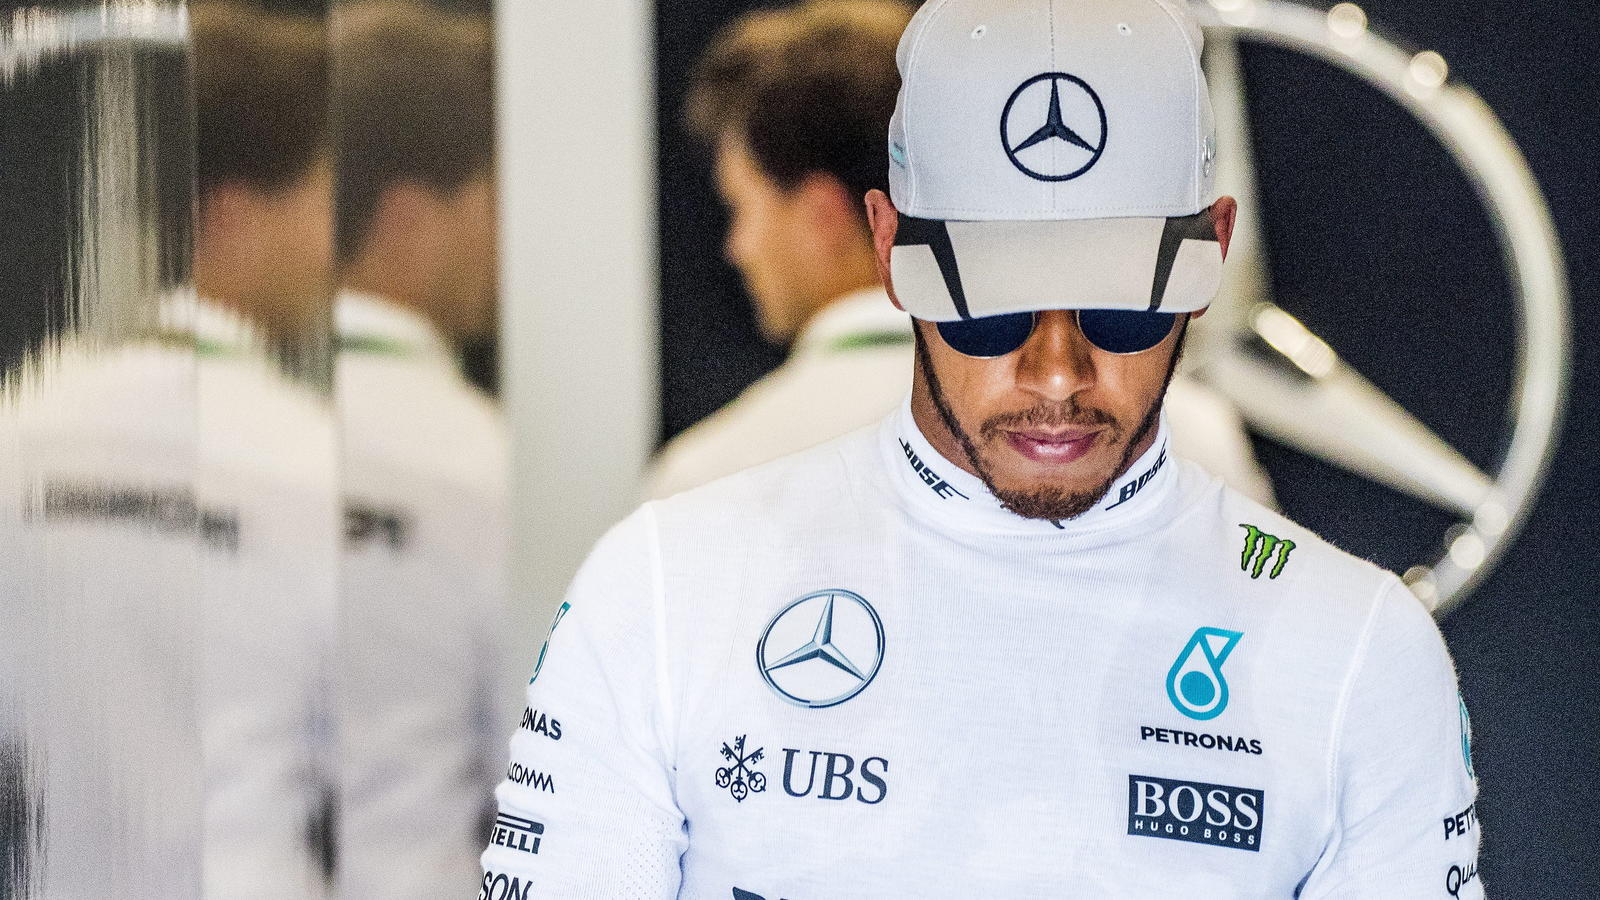 epa05512014 British Formula One driver Lewis Hamilton of Mercedes AMG GP during the third practice session at the Spa-Francorchamps race track near Francorchamps, Belgium, 27 August 2016. The 2016 Belgium Formula One Grand Prix will take place on 28 